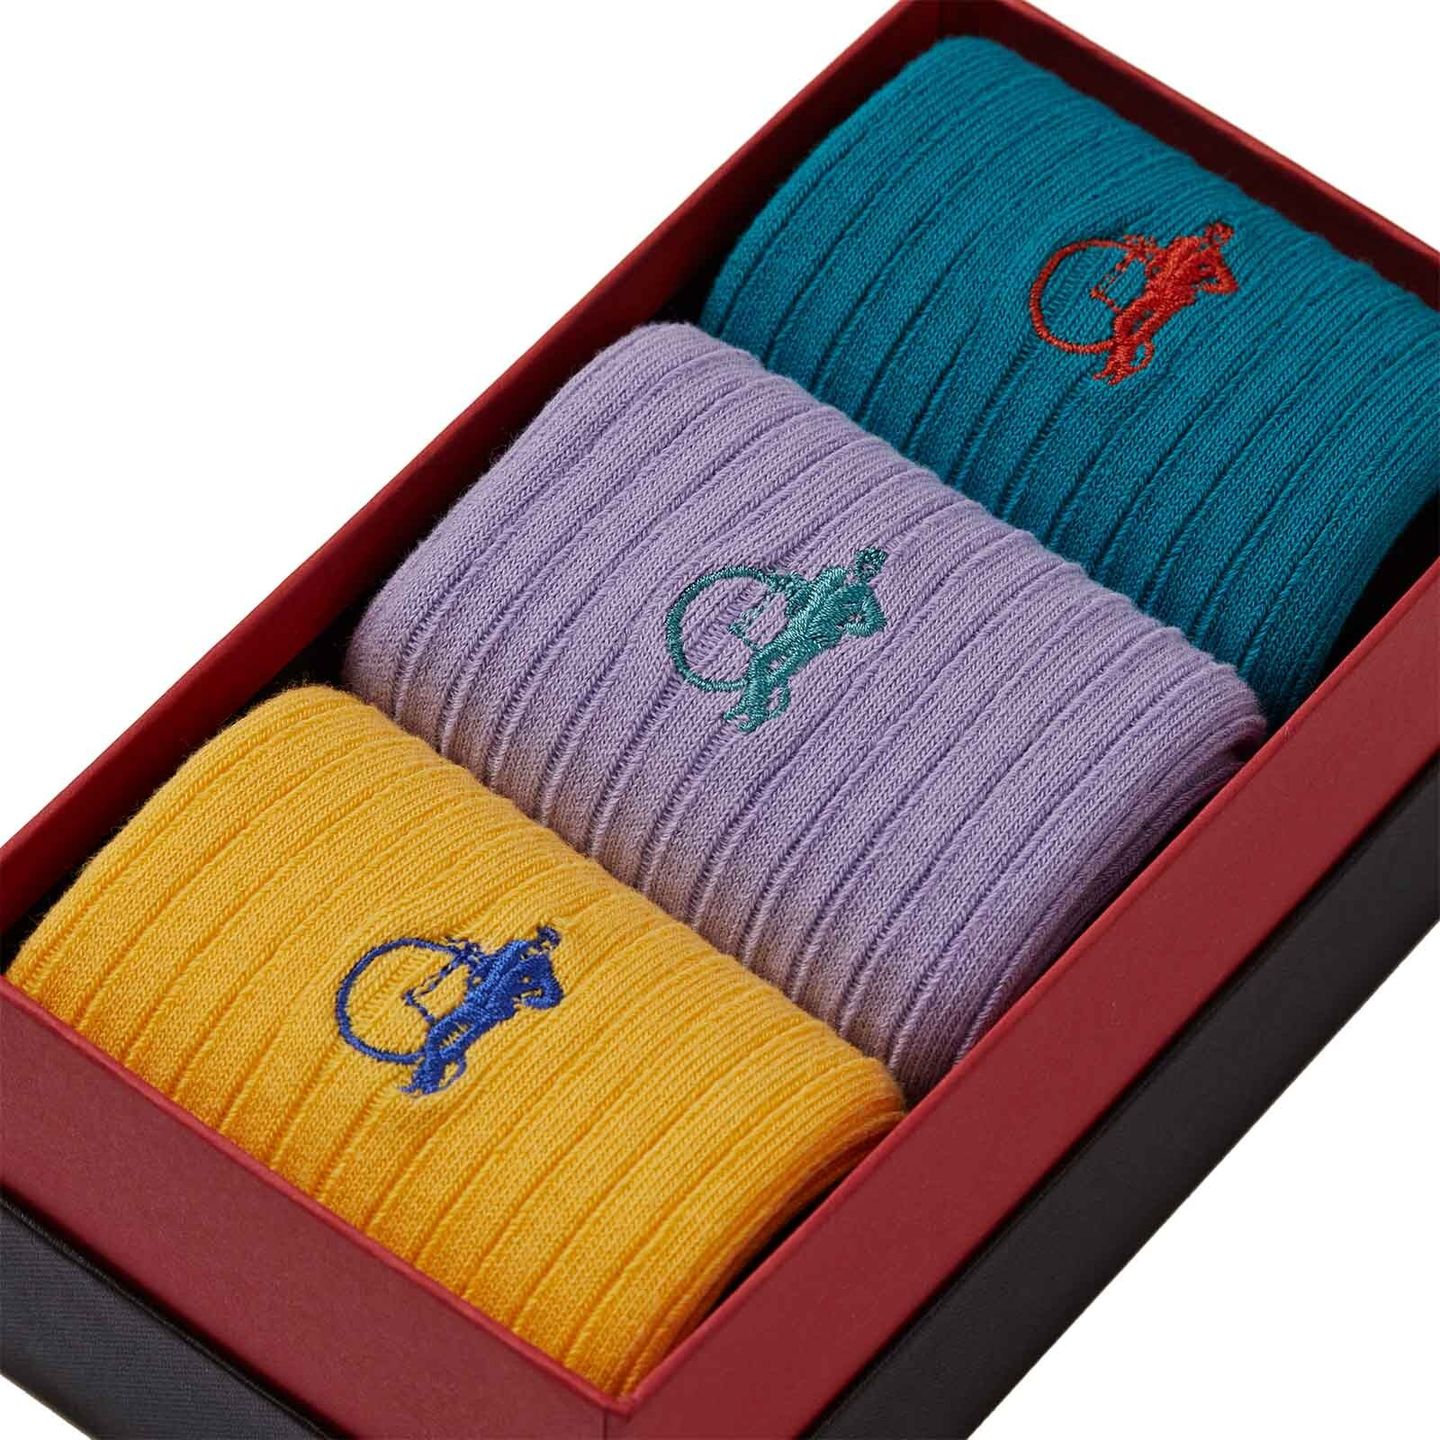 3 pair of blue, lilac and yellow socks in a box